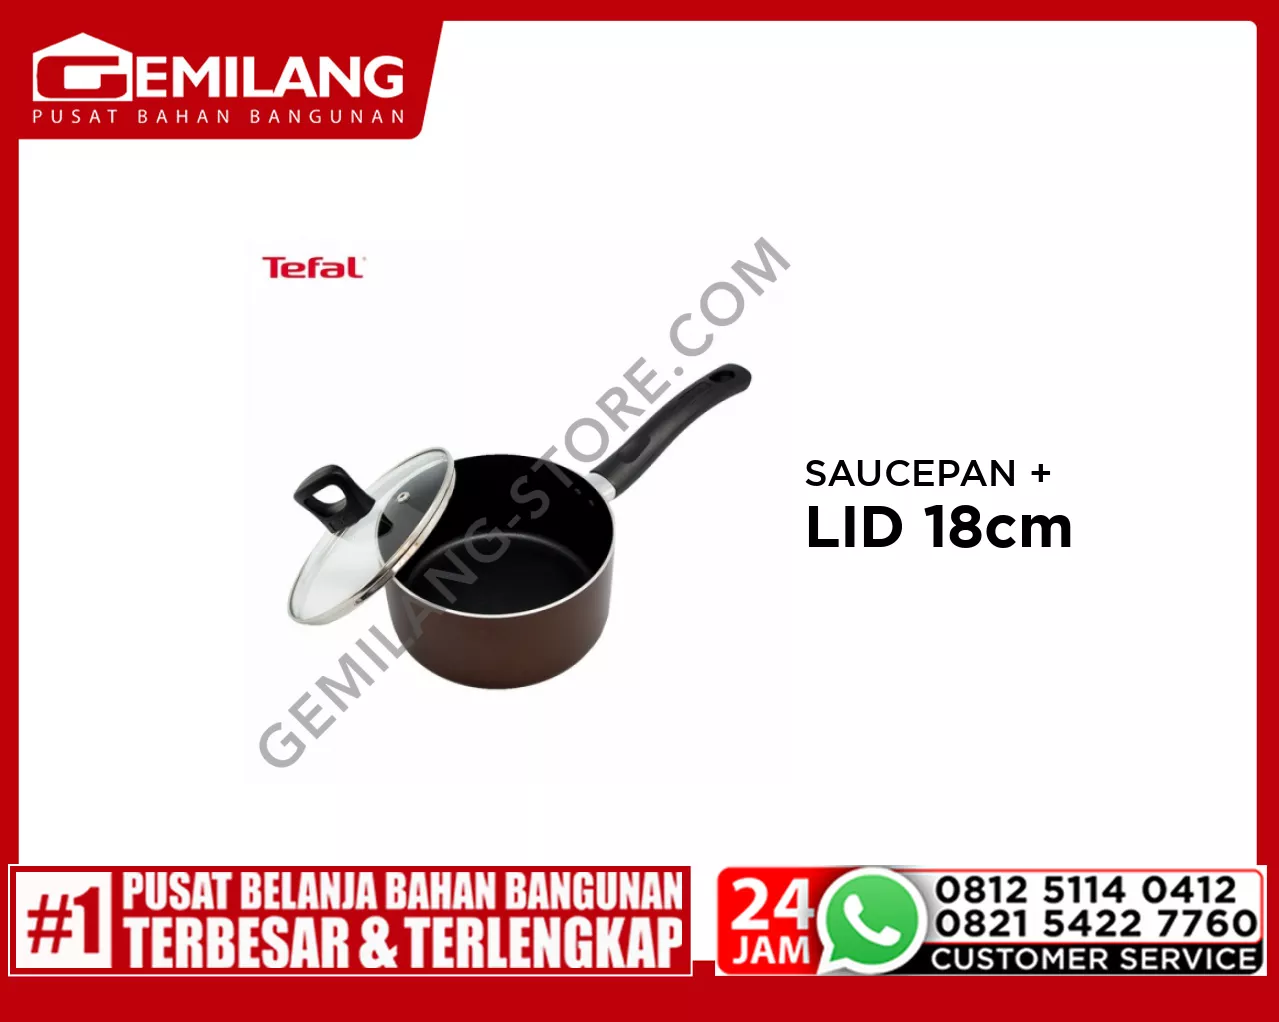 TEFAL DAY BY DAY SAUCEPAN + LID 18cm